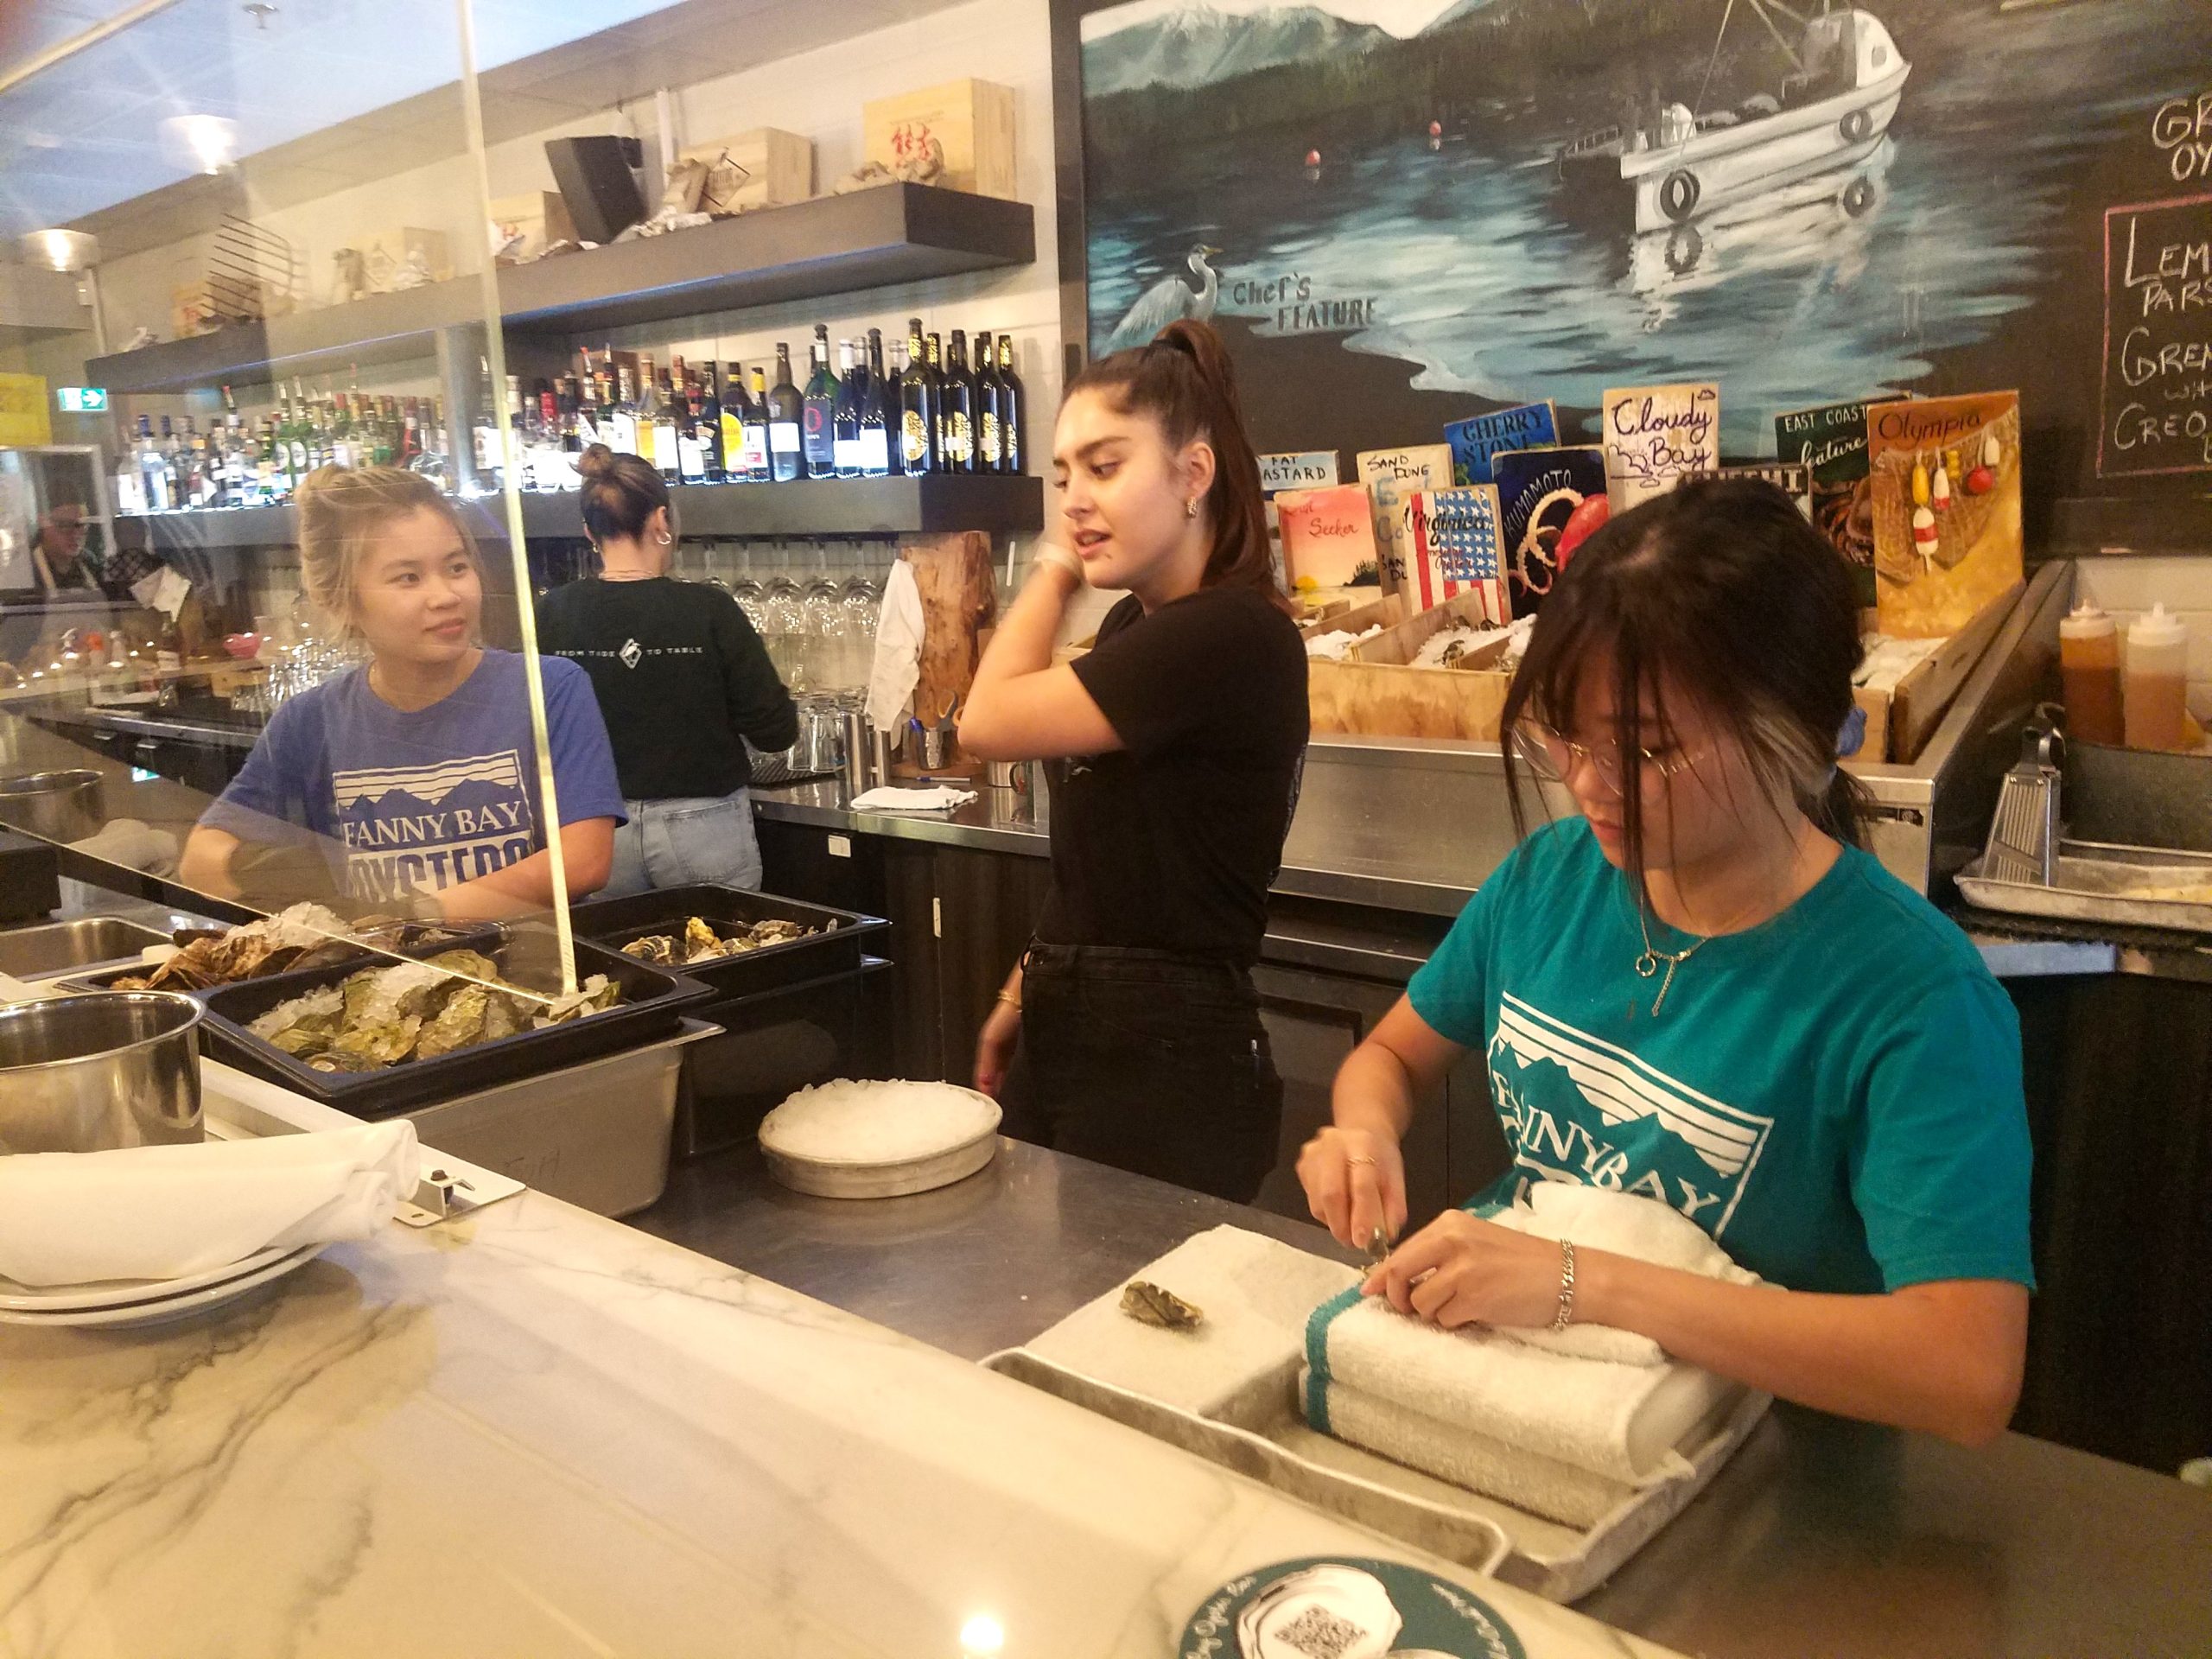 Fresh oysters shucked right in front of you at Fanny Bay's